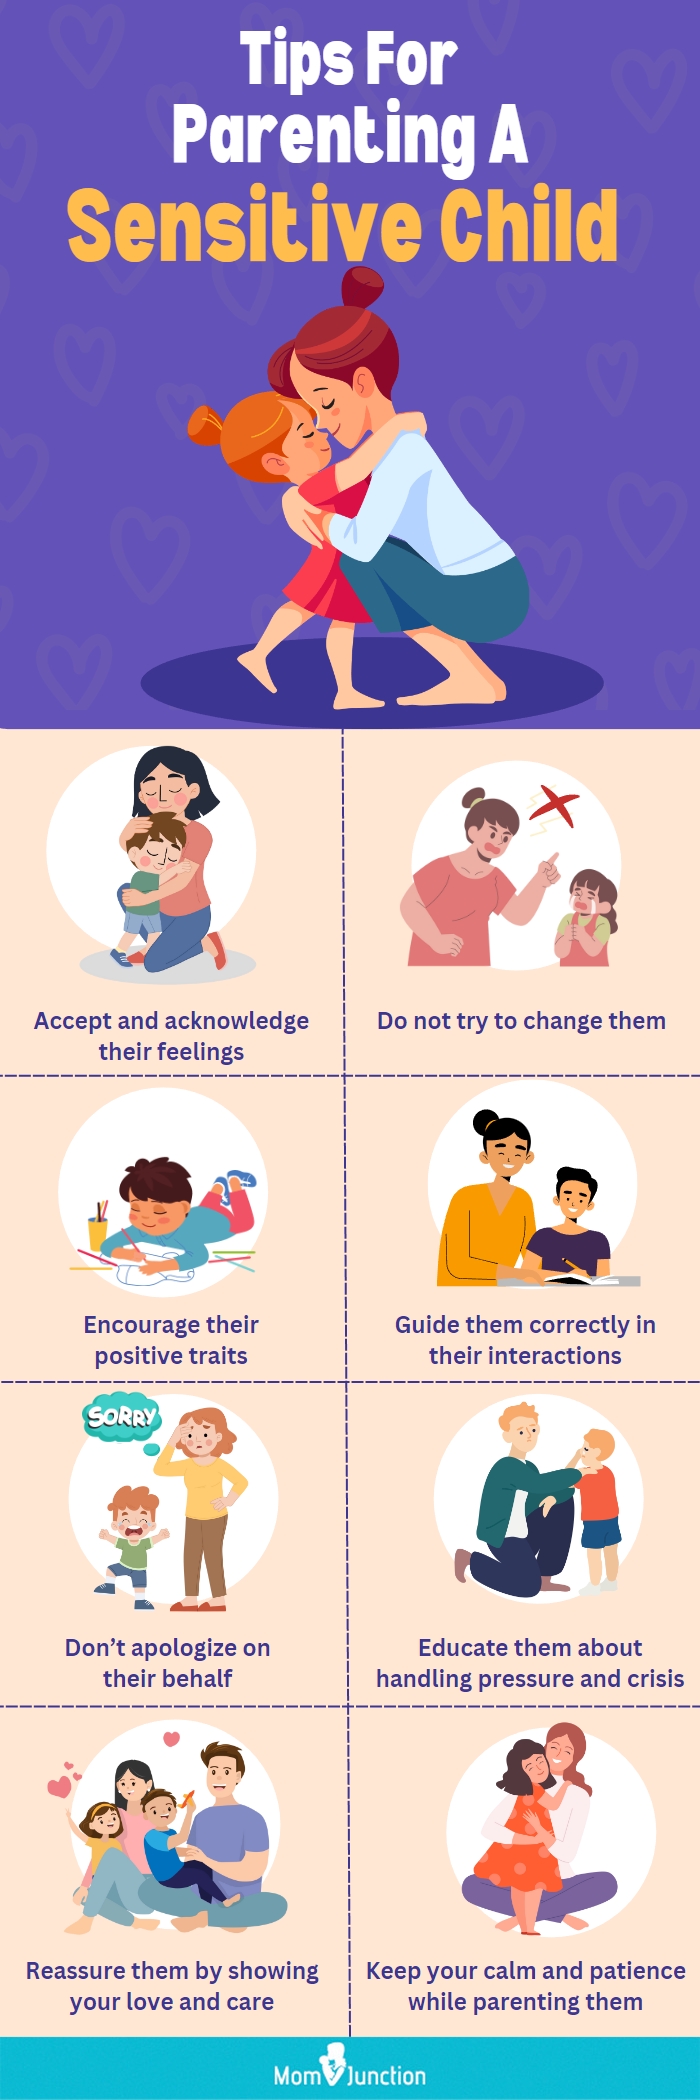 tips for parenting a sensitive child (infographic)